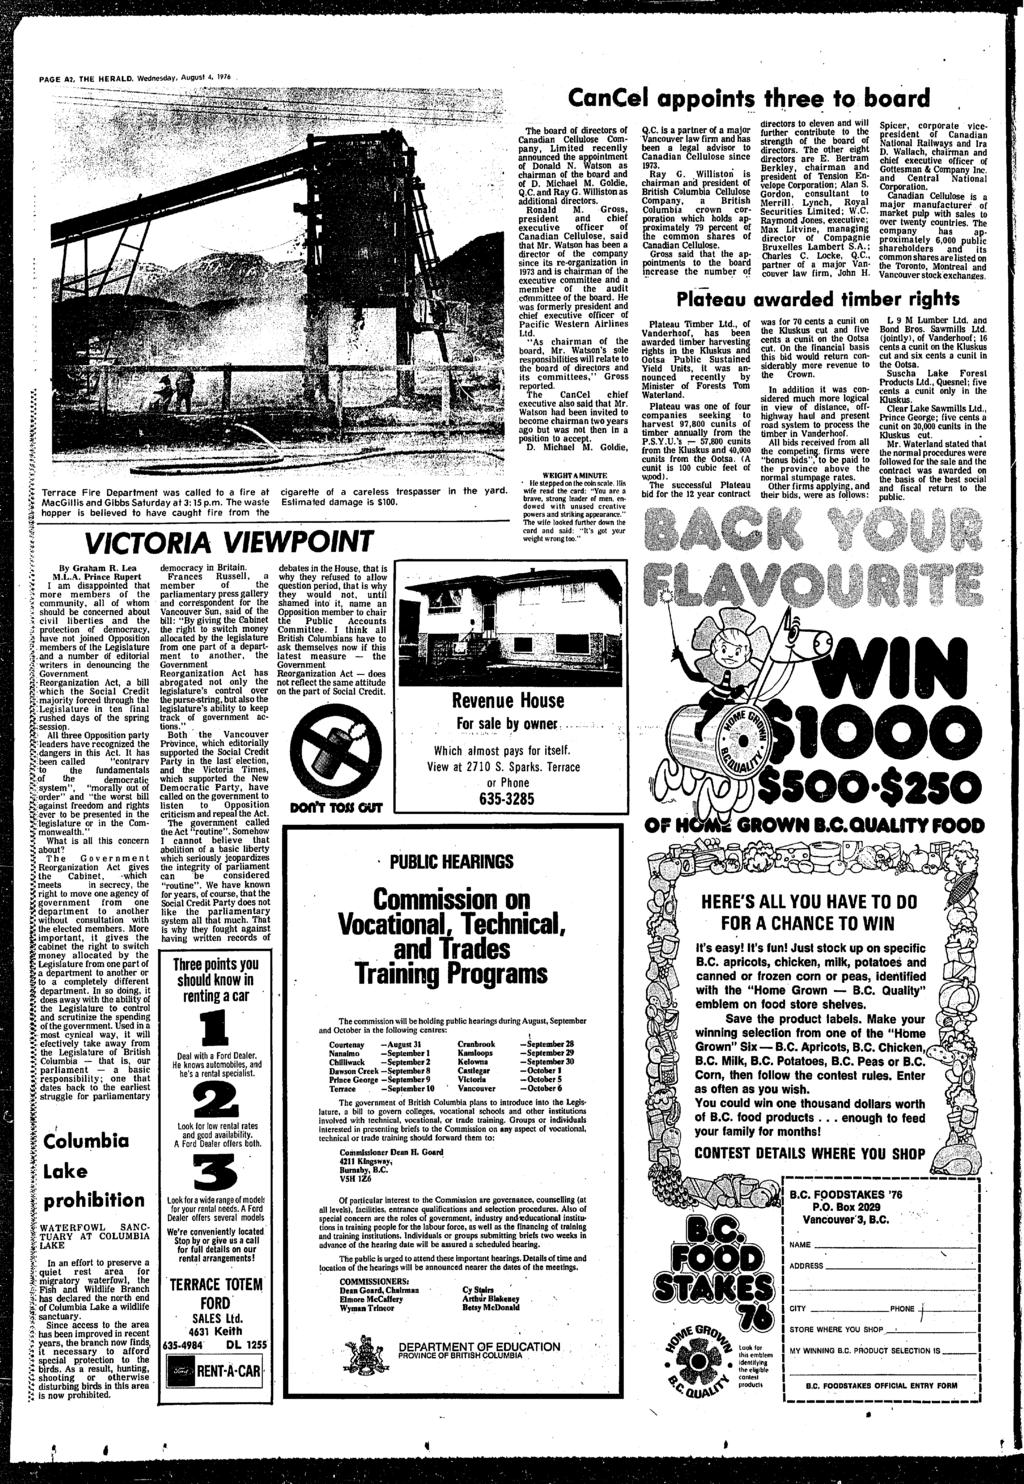 r '<, PAGE A2, THE HERALD, Wednesday, August 4, 1976 Terrace Fre Department was called to a fre at MacGlls and Gbbs Saturday at 3:]5 p.m. The waste hopper s beleved to have caught fre from the % :.